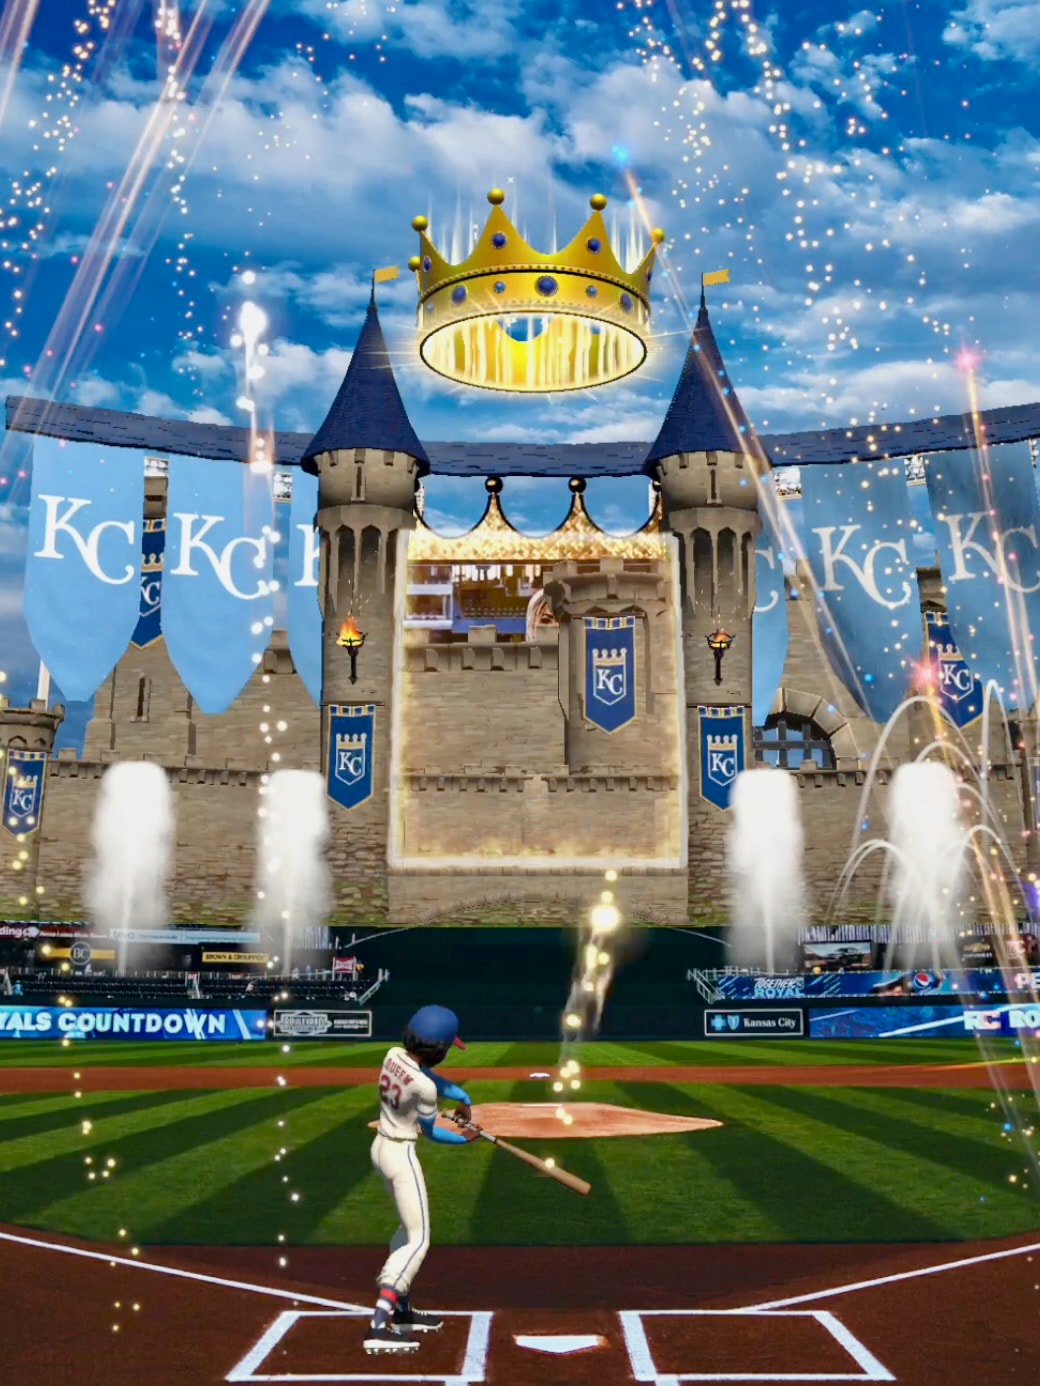 KC Royals - Game Day Experience